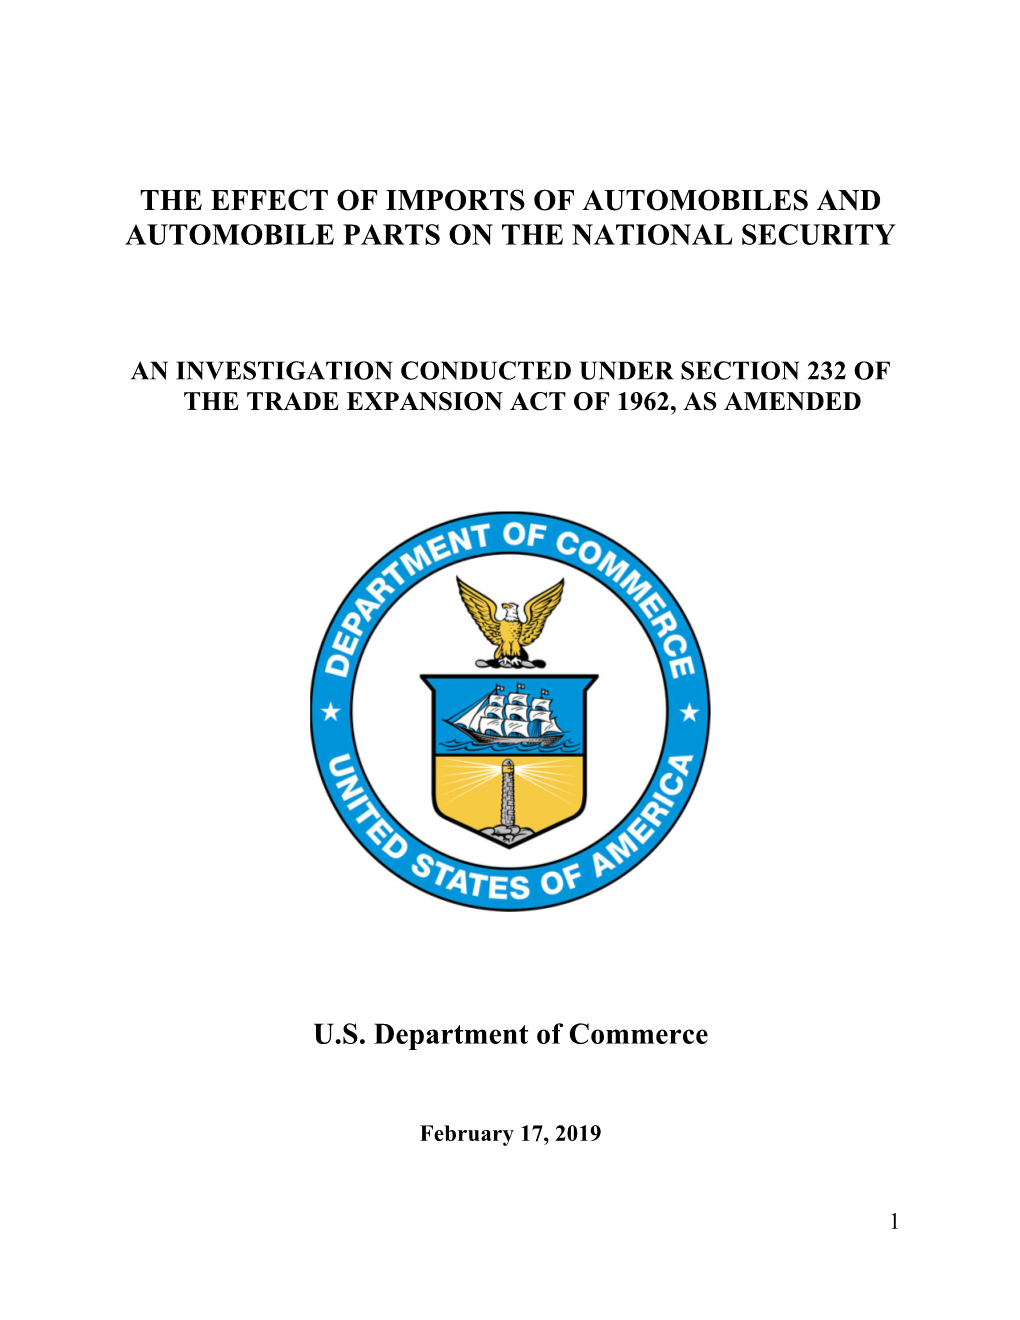 The Effect of Imports of Automobiles and Automobile Parts on the National Security